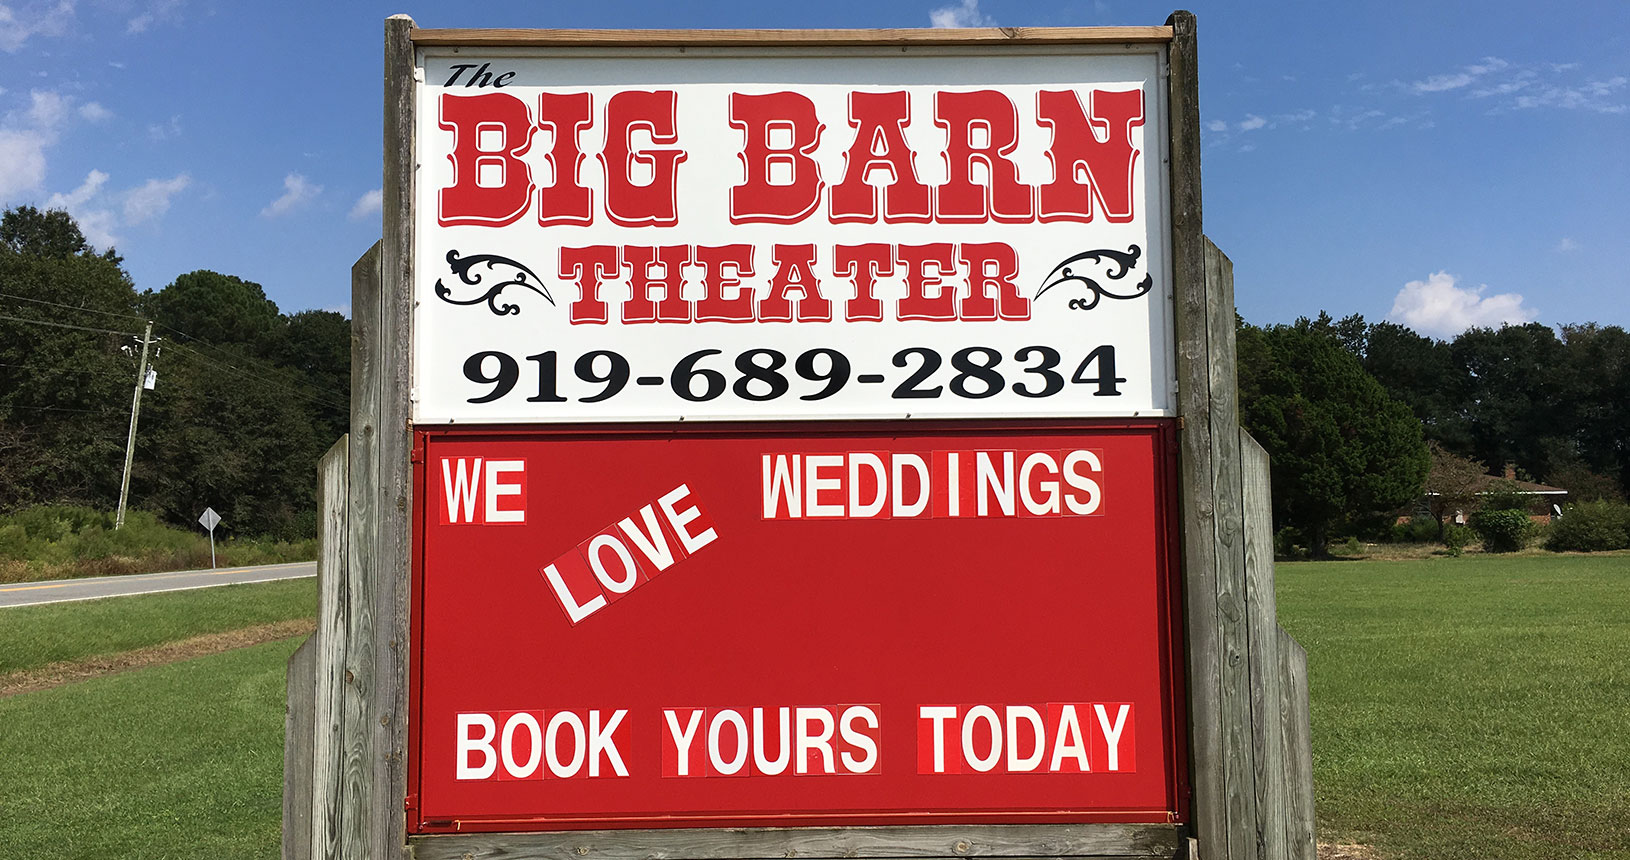 A sign for the big barn theater.